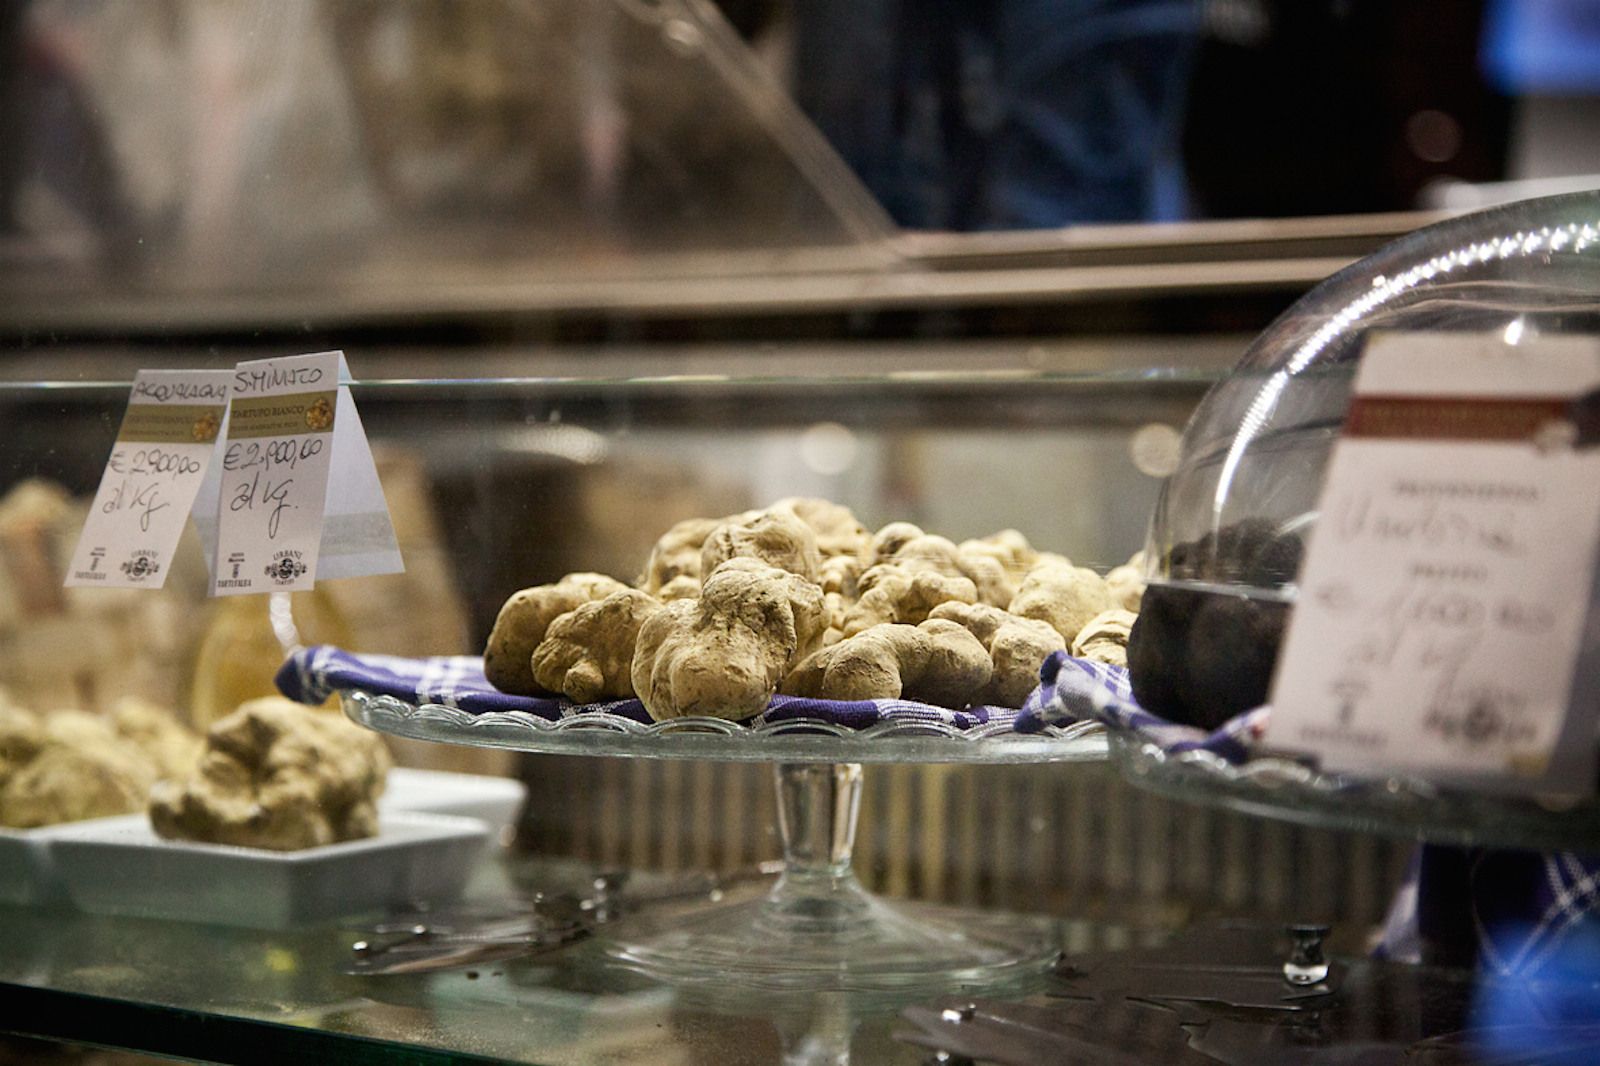 Where to find the real truffle (white or black) in Milan